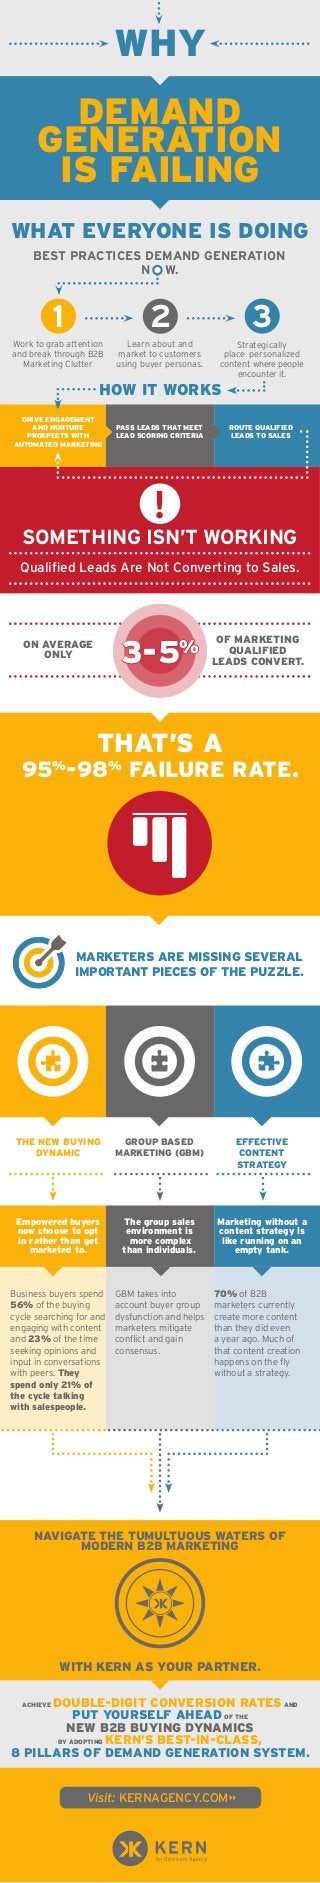 MARKETERS ARE MISSING SEVERAL
IMPORTANT PIECES OF THE PUZZLE.
WHY
DRIVE ENGAGEMENT
AND NURTURE
PROSPECTS WITH
AUTOMATED MARKETING
PASS LEADS THAT MEET
LEAD SCORING CRITERIA
ROUTE QUALIFIED
LEADS TO SALES
HOW IT WORKS
SOMETHING ISN’T WORKING
Qualified Leads Are Not Converting to Sales.
Business buyers spend
56% of the buying
cycle searching for and
engaging with content
and 23% of the time
seeking opinions and
input in conversations
with peers. They
spend only 21% of
the cycle talking
with salespeople.
GBM takes into
account buyer group
dysfunction and helps
marketers mitigate
conflict and gain
consensus.
70% of B2B
marketers currently
create more content
than they did even
a year ago. Much of
that content creation
happens on the fly
without a strategy.
Work to grab attention
and break through B2B
Marketing Clutter
Learn about and
market to customers
using buyer personas.
Strategically
place personalized
content where people
encounter it.
1 2 3
DEMAND
GENERATION
IS FAILING
BEST PRACTICES DEMAND GENERATION
N W.
ON AVERAGE
ONLY
OF MARKETING
QUALIFIED
LEADS CONVERT.3-5%
THAT’S A
95%
-98%
FAILURE RATE.
WHAT EVERYONE IS DOING
THE NEW BUYING
DYNAMIC
GROUP BASED
MARKETING (GBM)
EFFECTIVE
CONTENT
STRATEGY
Empowered buyers
now choose to opt
in rather than get
marketed to.
WITH KERN AS YOUR PARTNER.
NAVIGATE THE TUMULTUOUS WATERS OF
MODERN B2B MARKETING
The group sales
environment is
more complex
than individuals.
Marketing without a
content strategy is
like running on an
empty tank.
ACHIEVE DOUBLE-DIGIT CONVERSION RATES AND
PUT YOURSELF AHEAD OF THE
NEW B2B BUYING DYNAMICS
BY ADOPTING KERN’S BEST-IN-CLASS,
8 PILLARS OF DEMAND GENERATION SYSTEM.
!
Visit: KERNAGENCY.COM
 